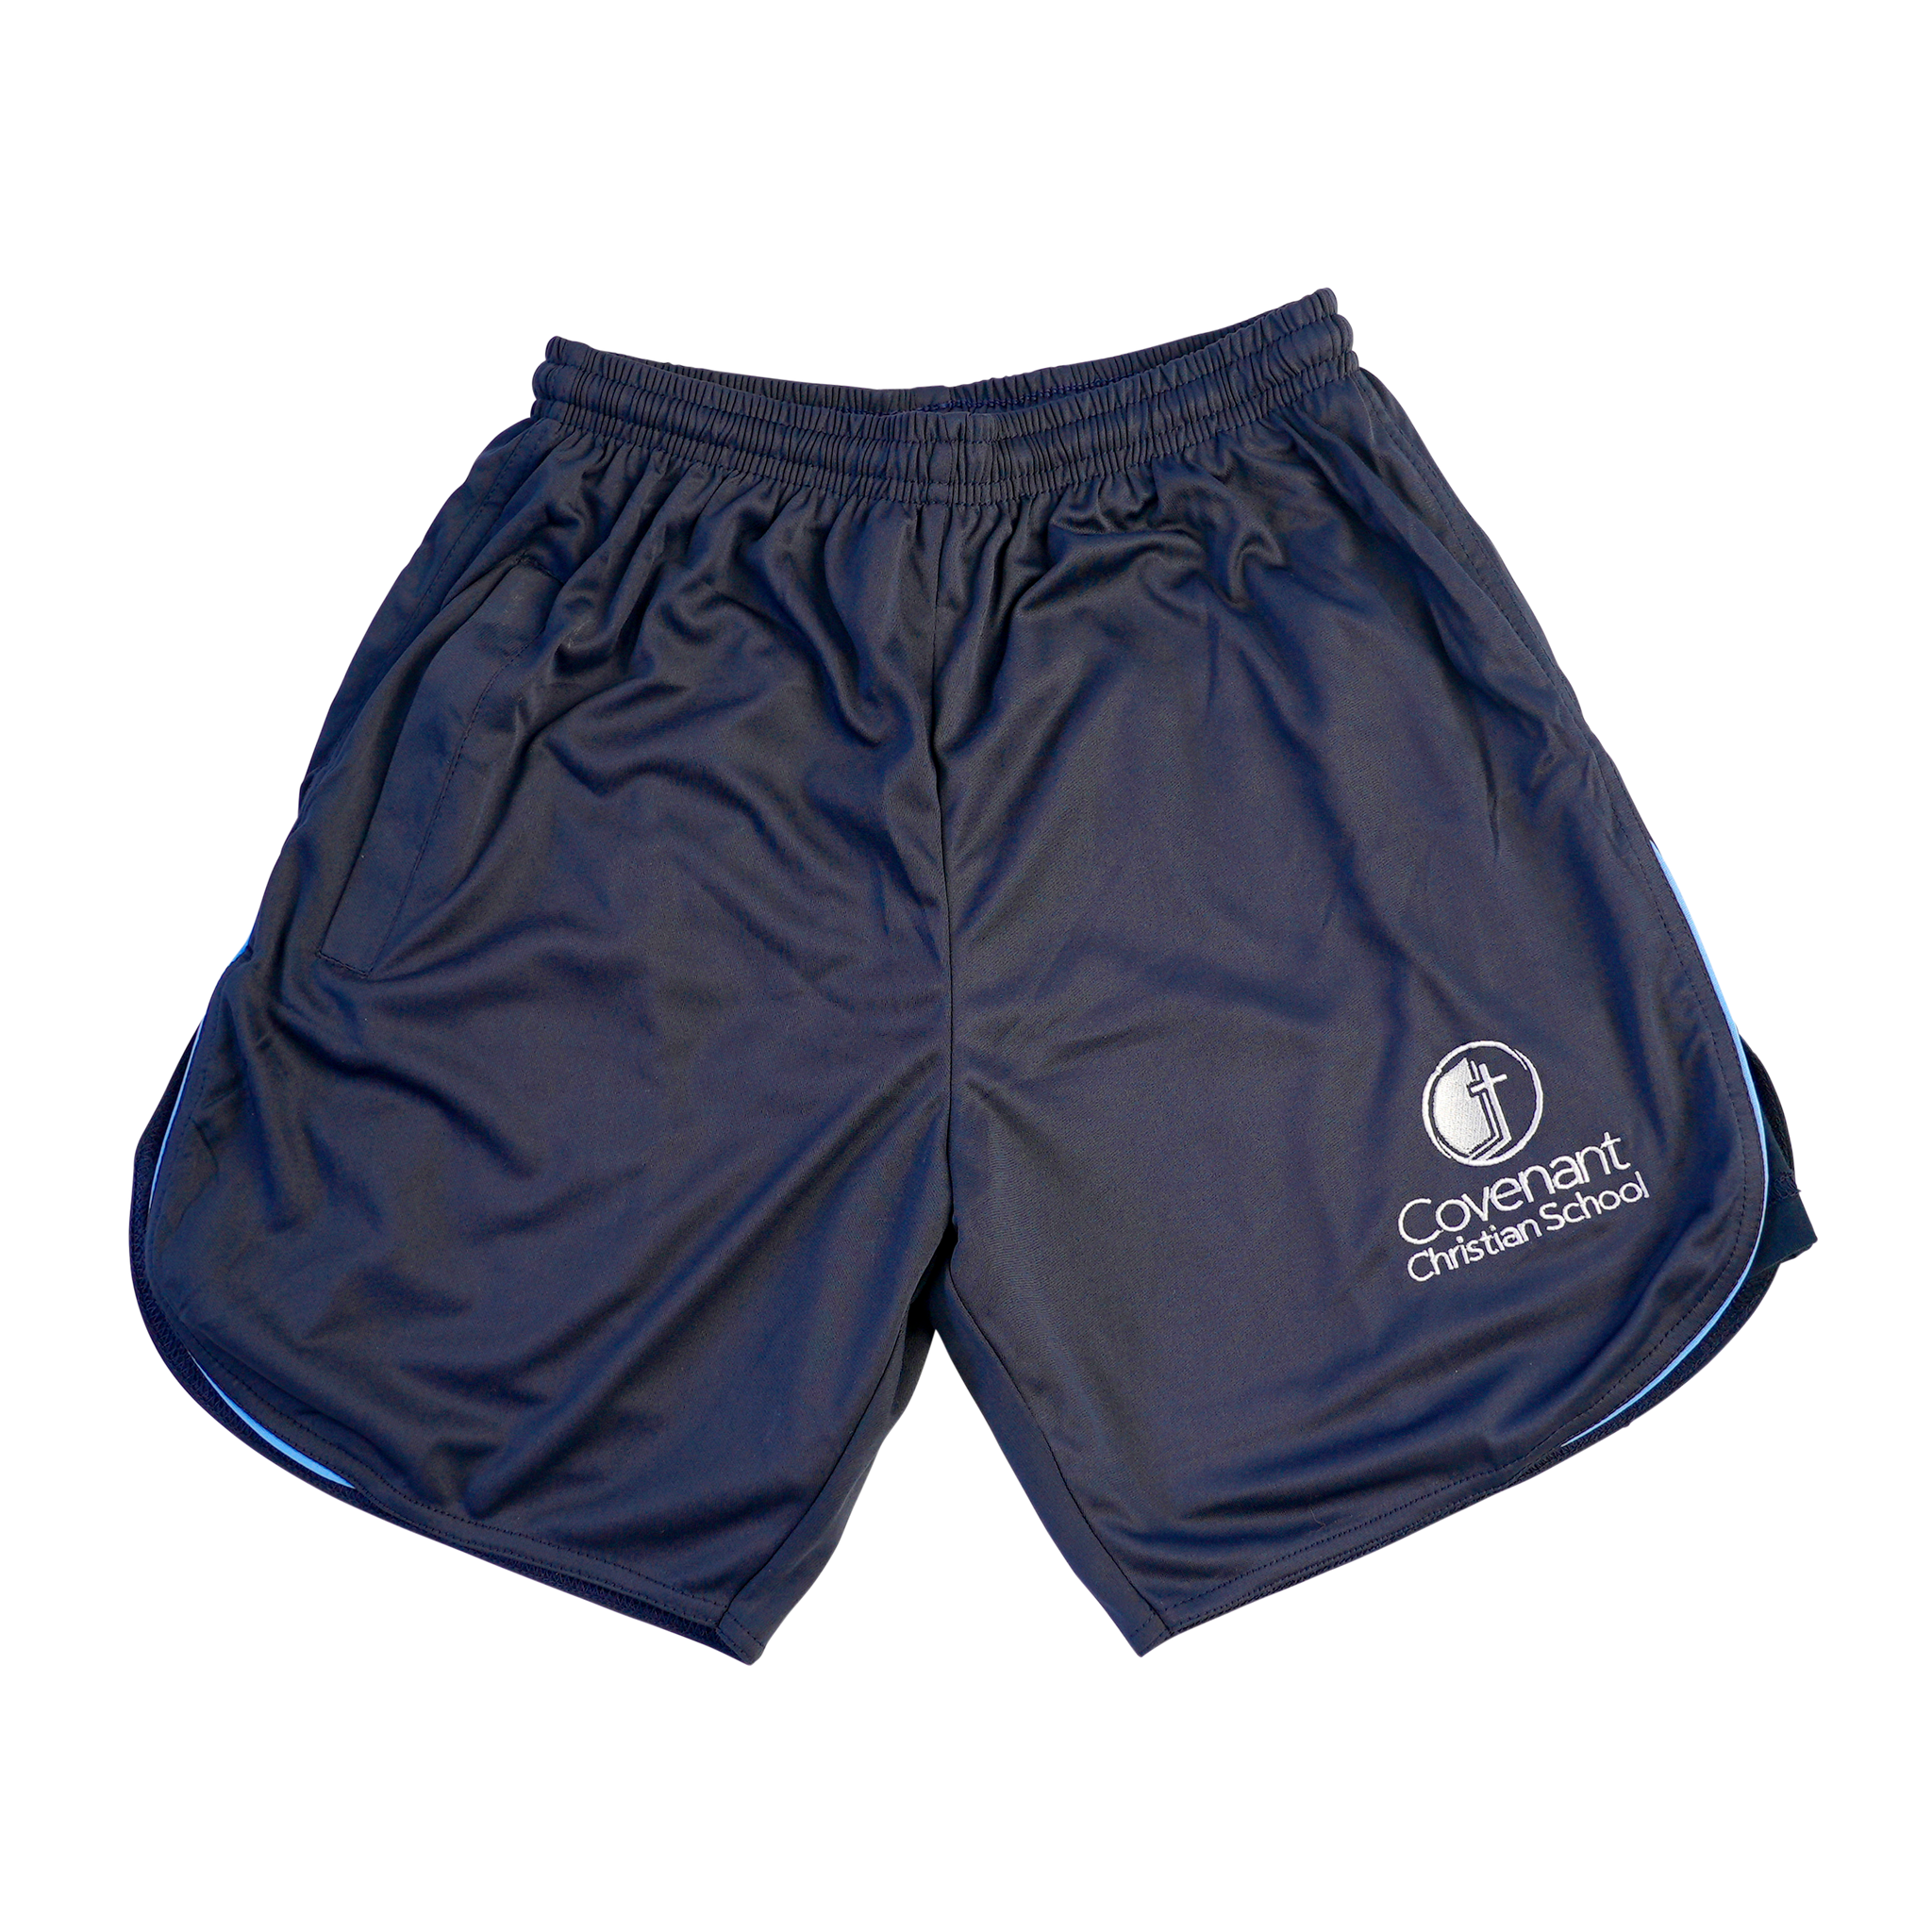 Secondary School Girls Sports Shorts - Limited Stock